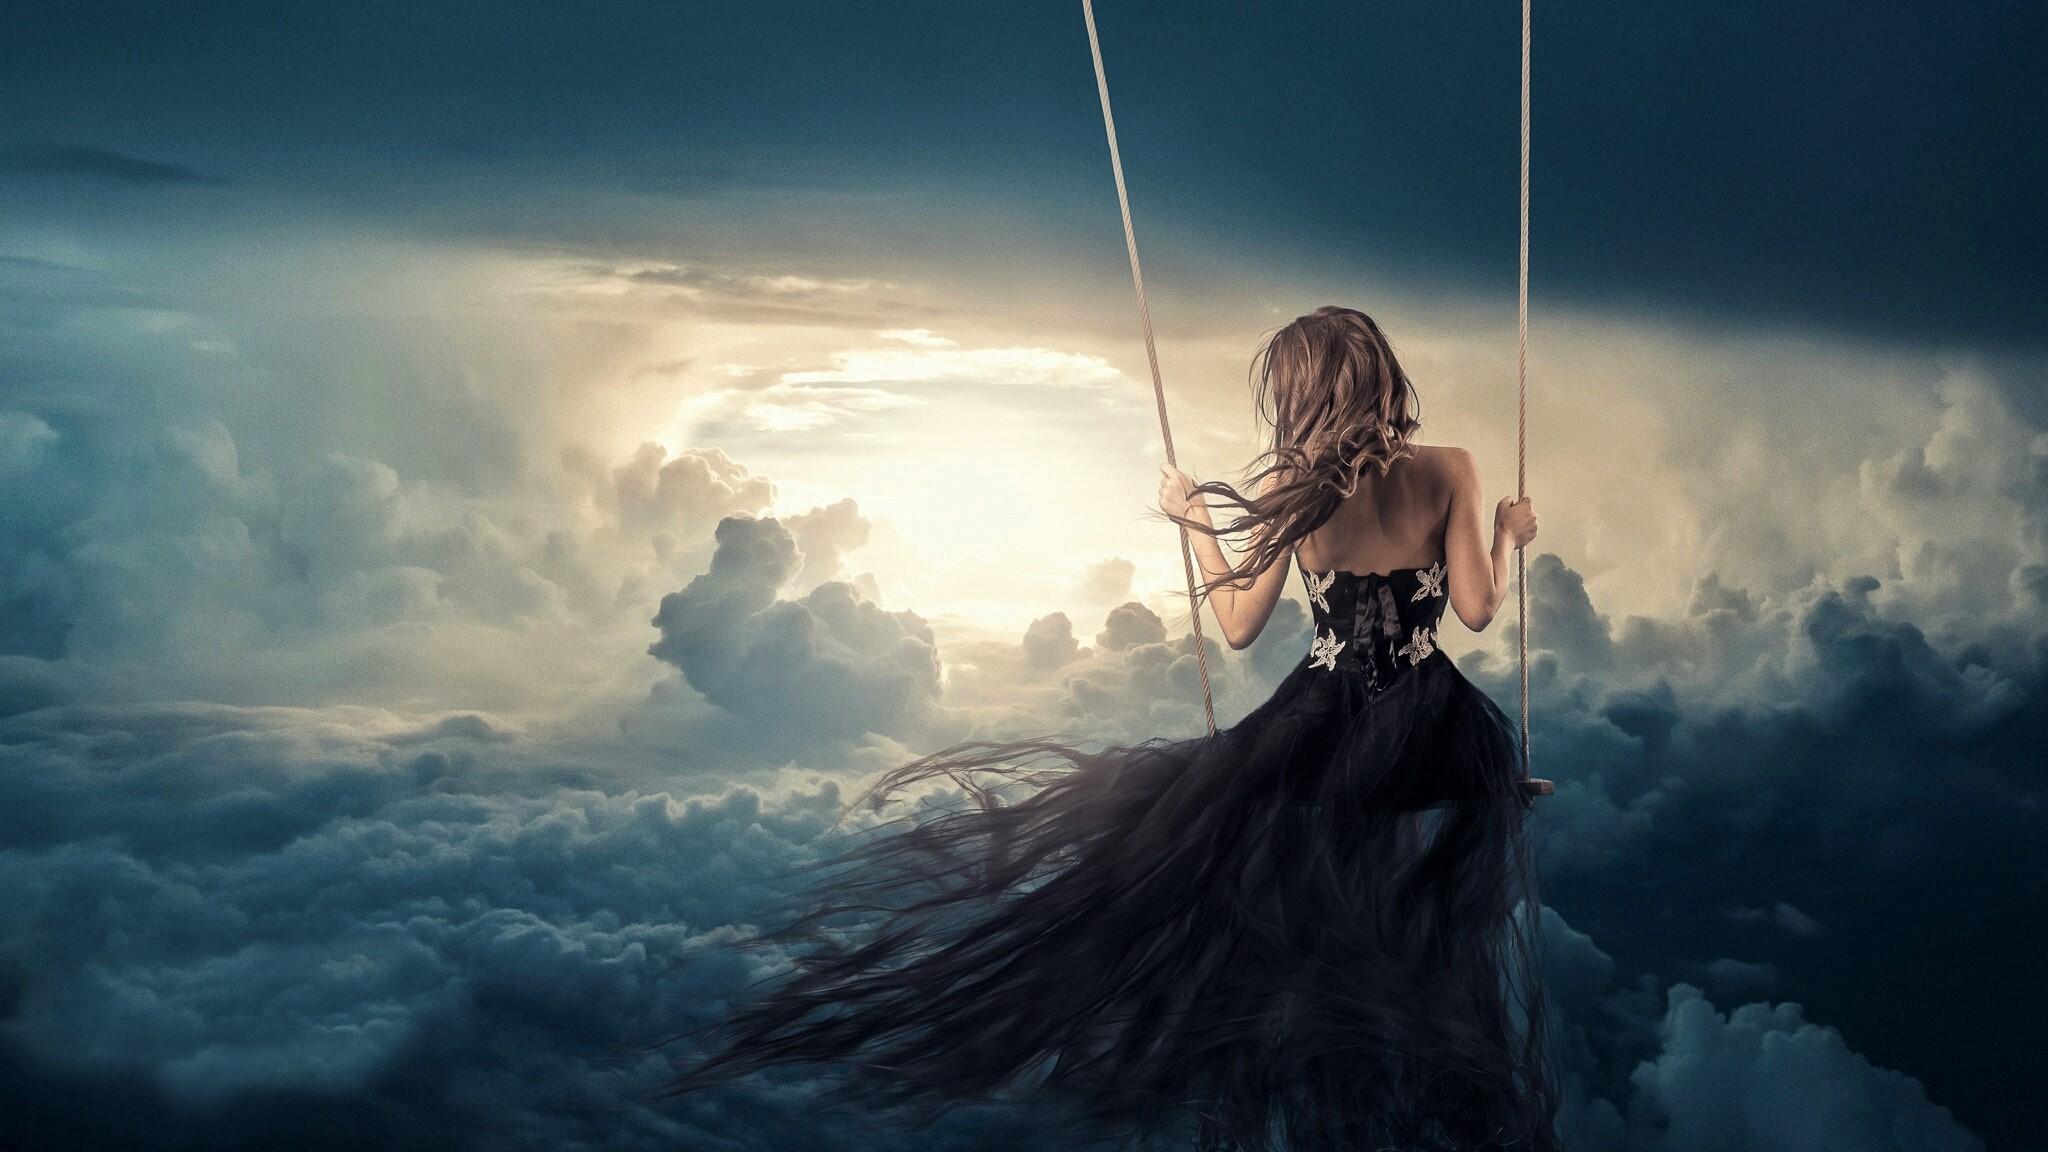 Swinging Above the Clouds HD Wallpaper. Background Image